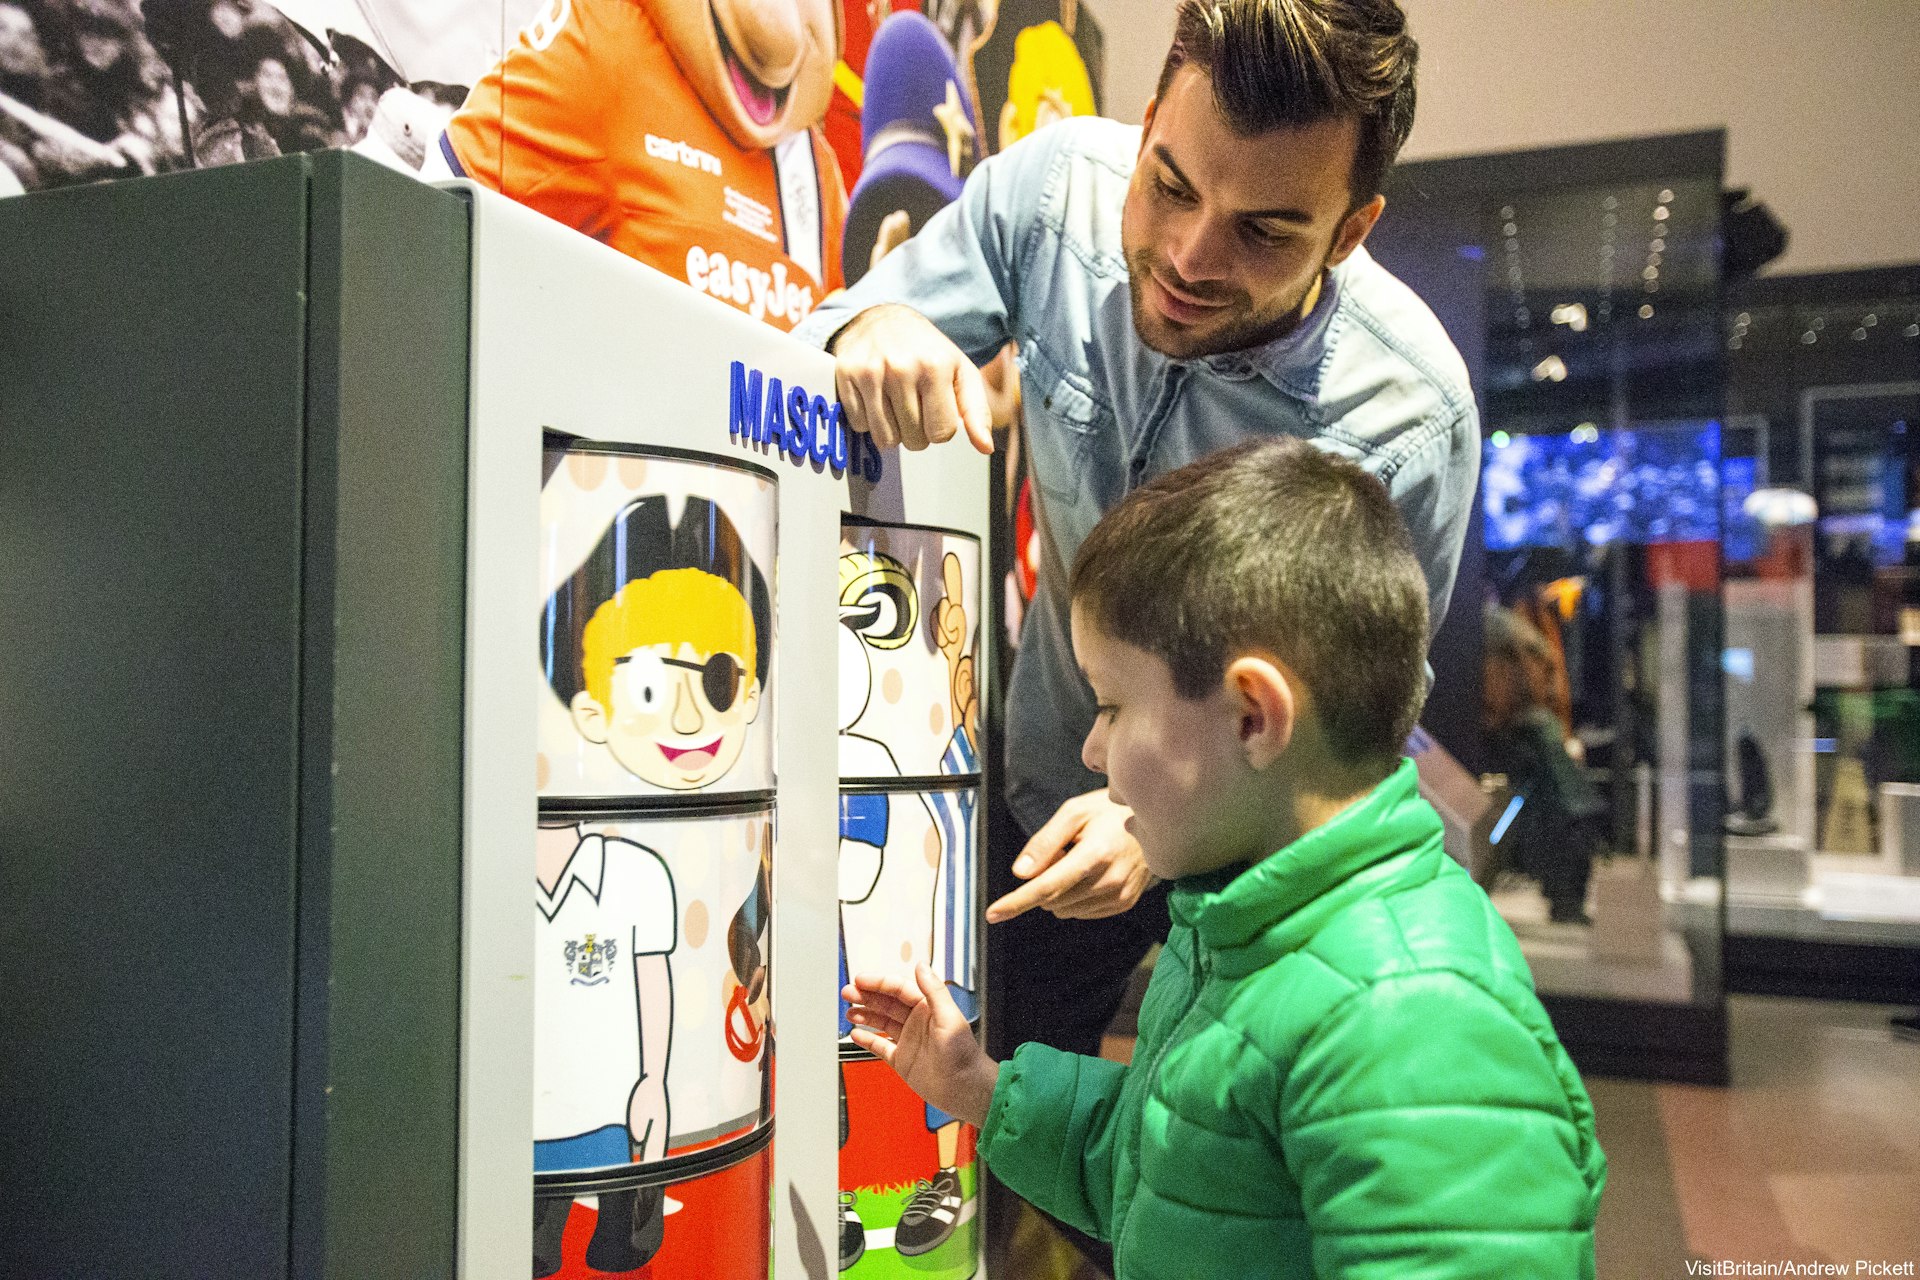 An Arabic family, a father and son visiting the The National Football Museum - using interactive exhibits about the game of soccer and its history.